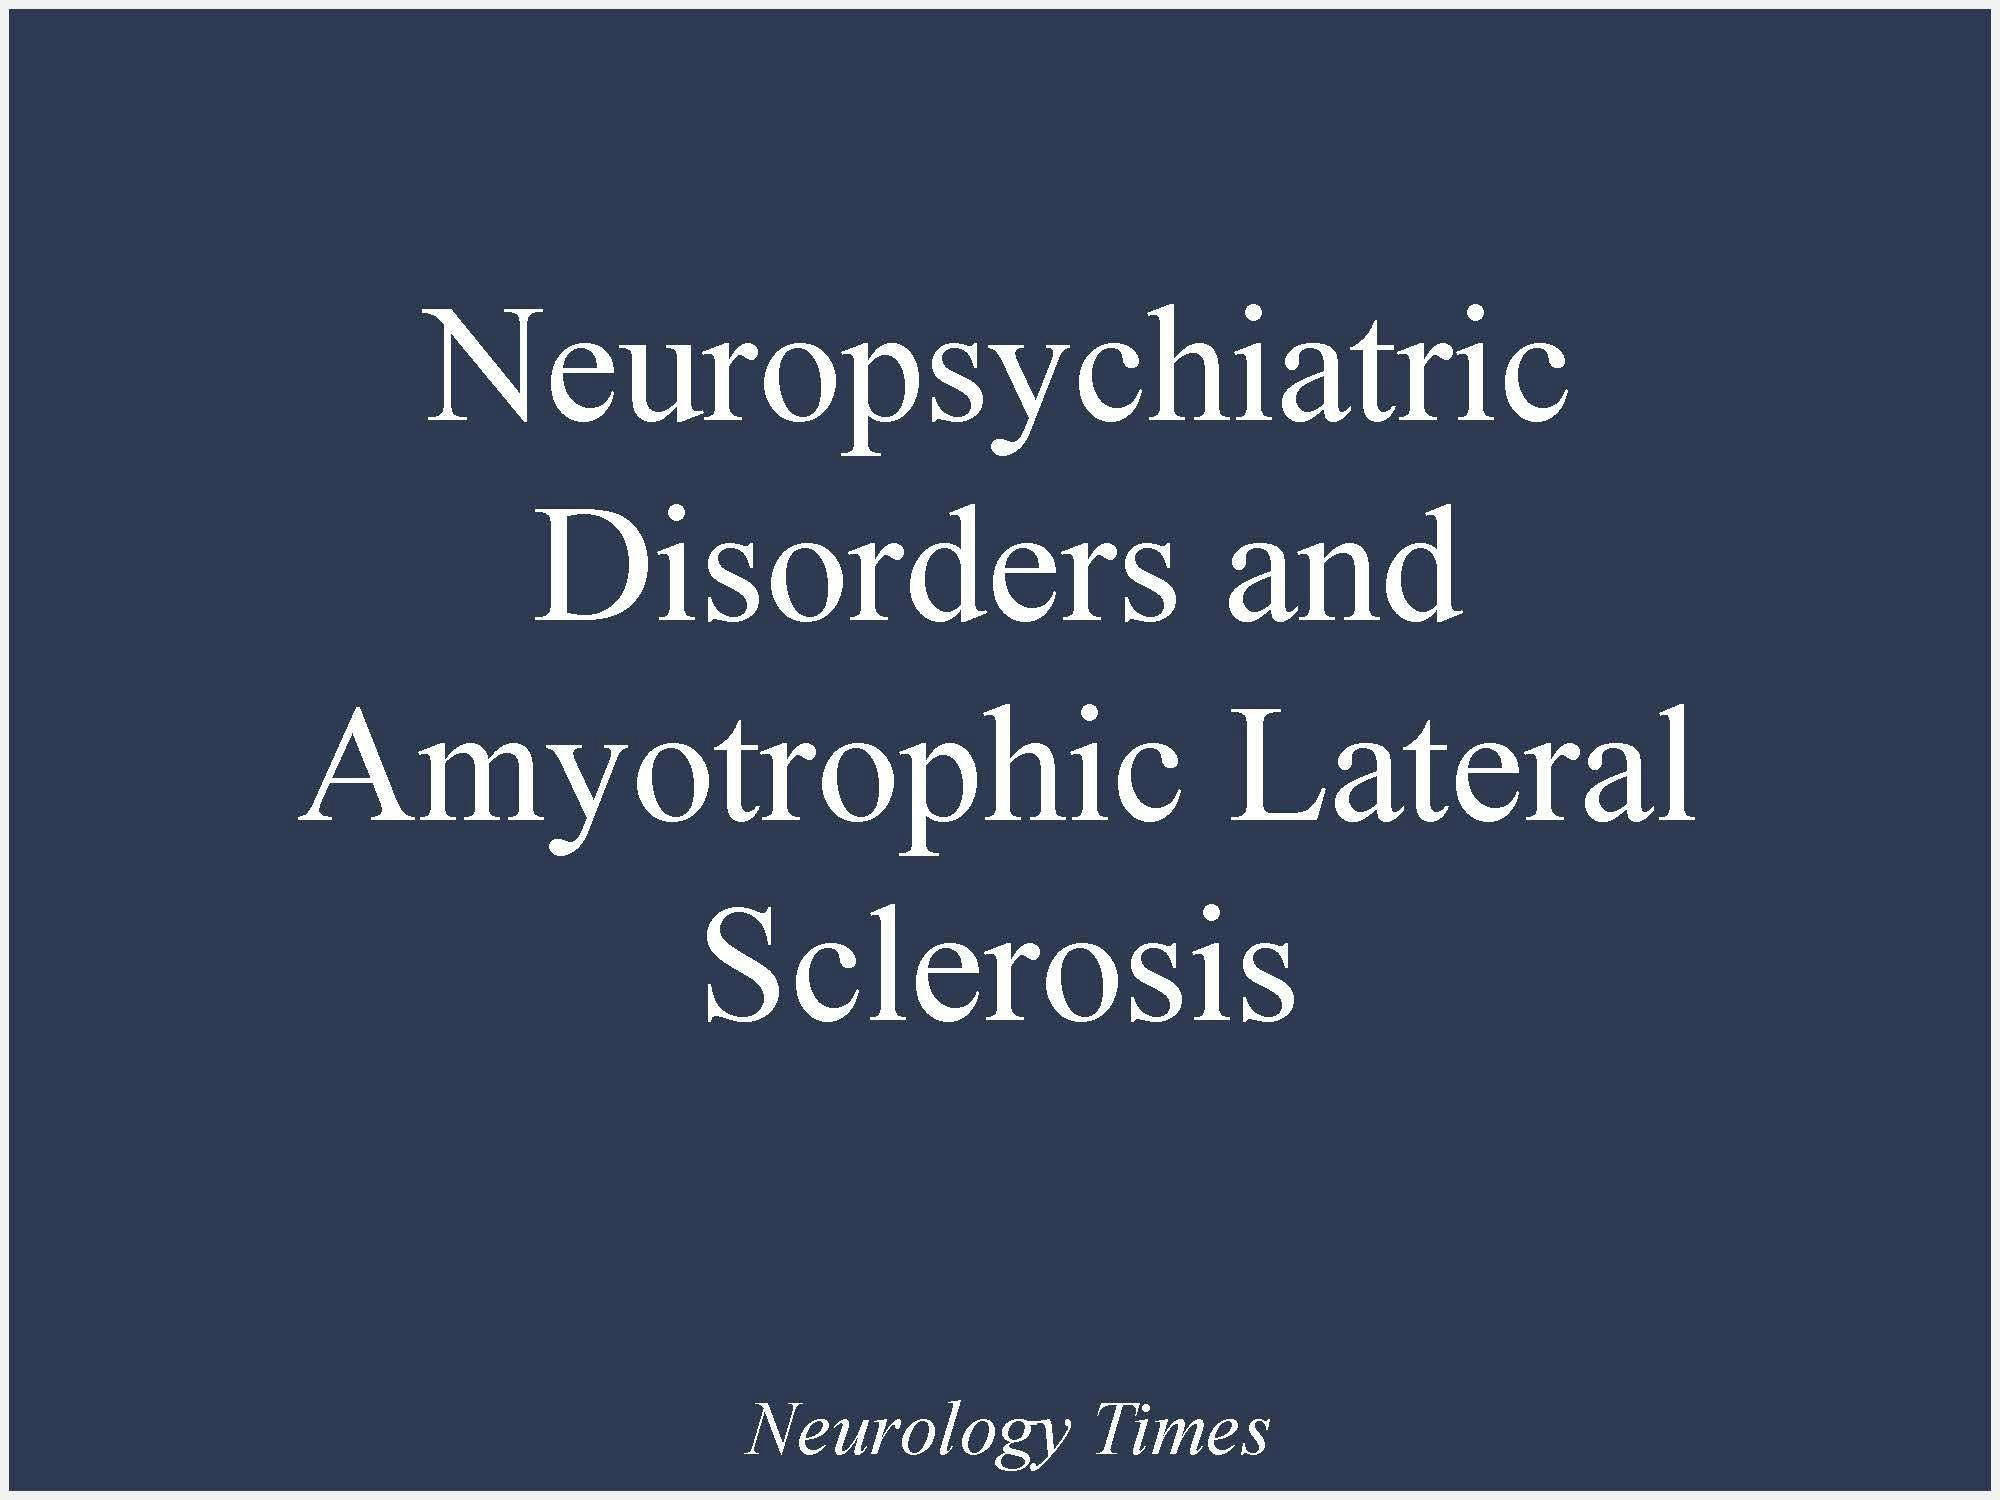 Neuropsychiatric Disorders and Amyotrophic Lateral Sclerosis